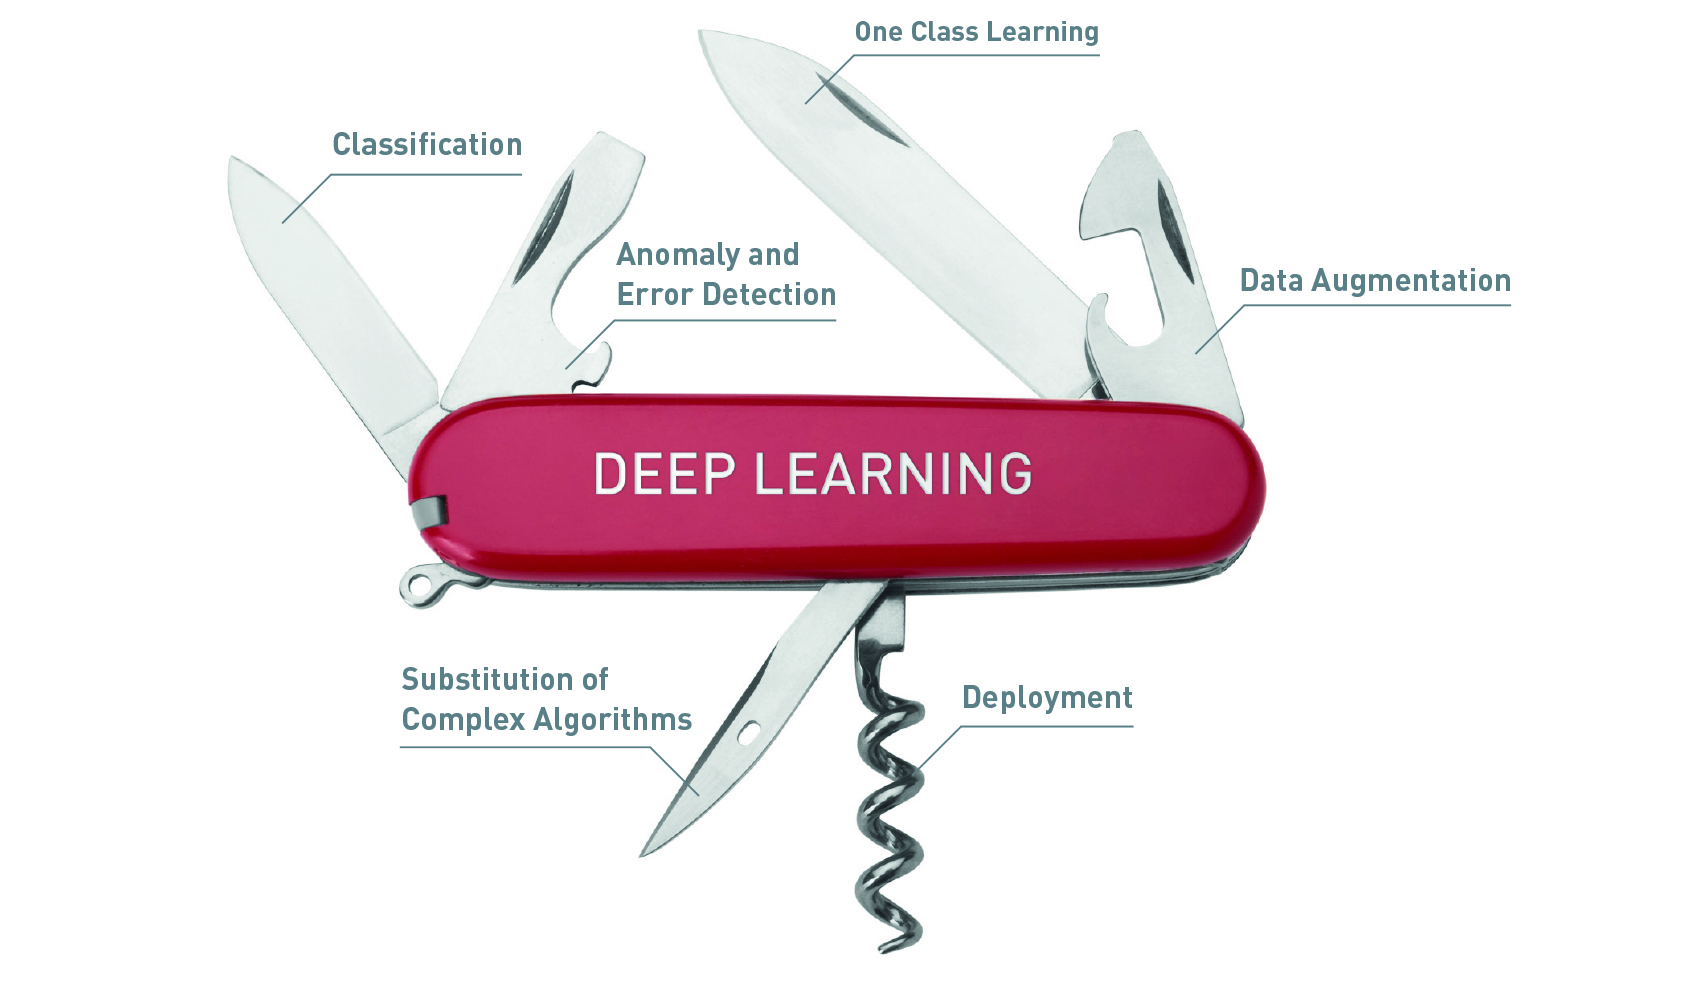 wiss knife with Deep Learning Tools e.g. classification, one class learning, anomaly and error detection, data augmentation, substitutions of compley algorithms, deployment. 